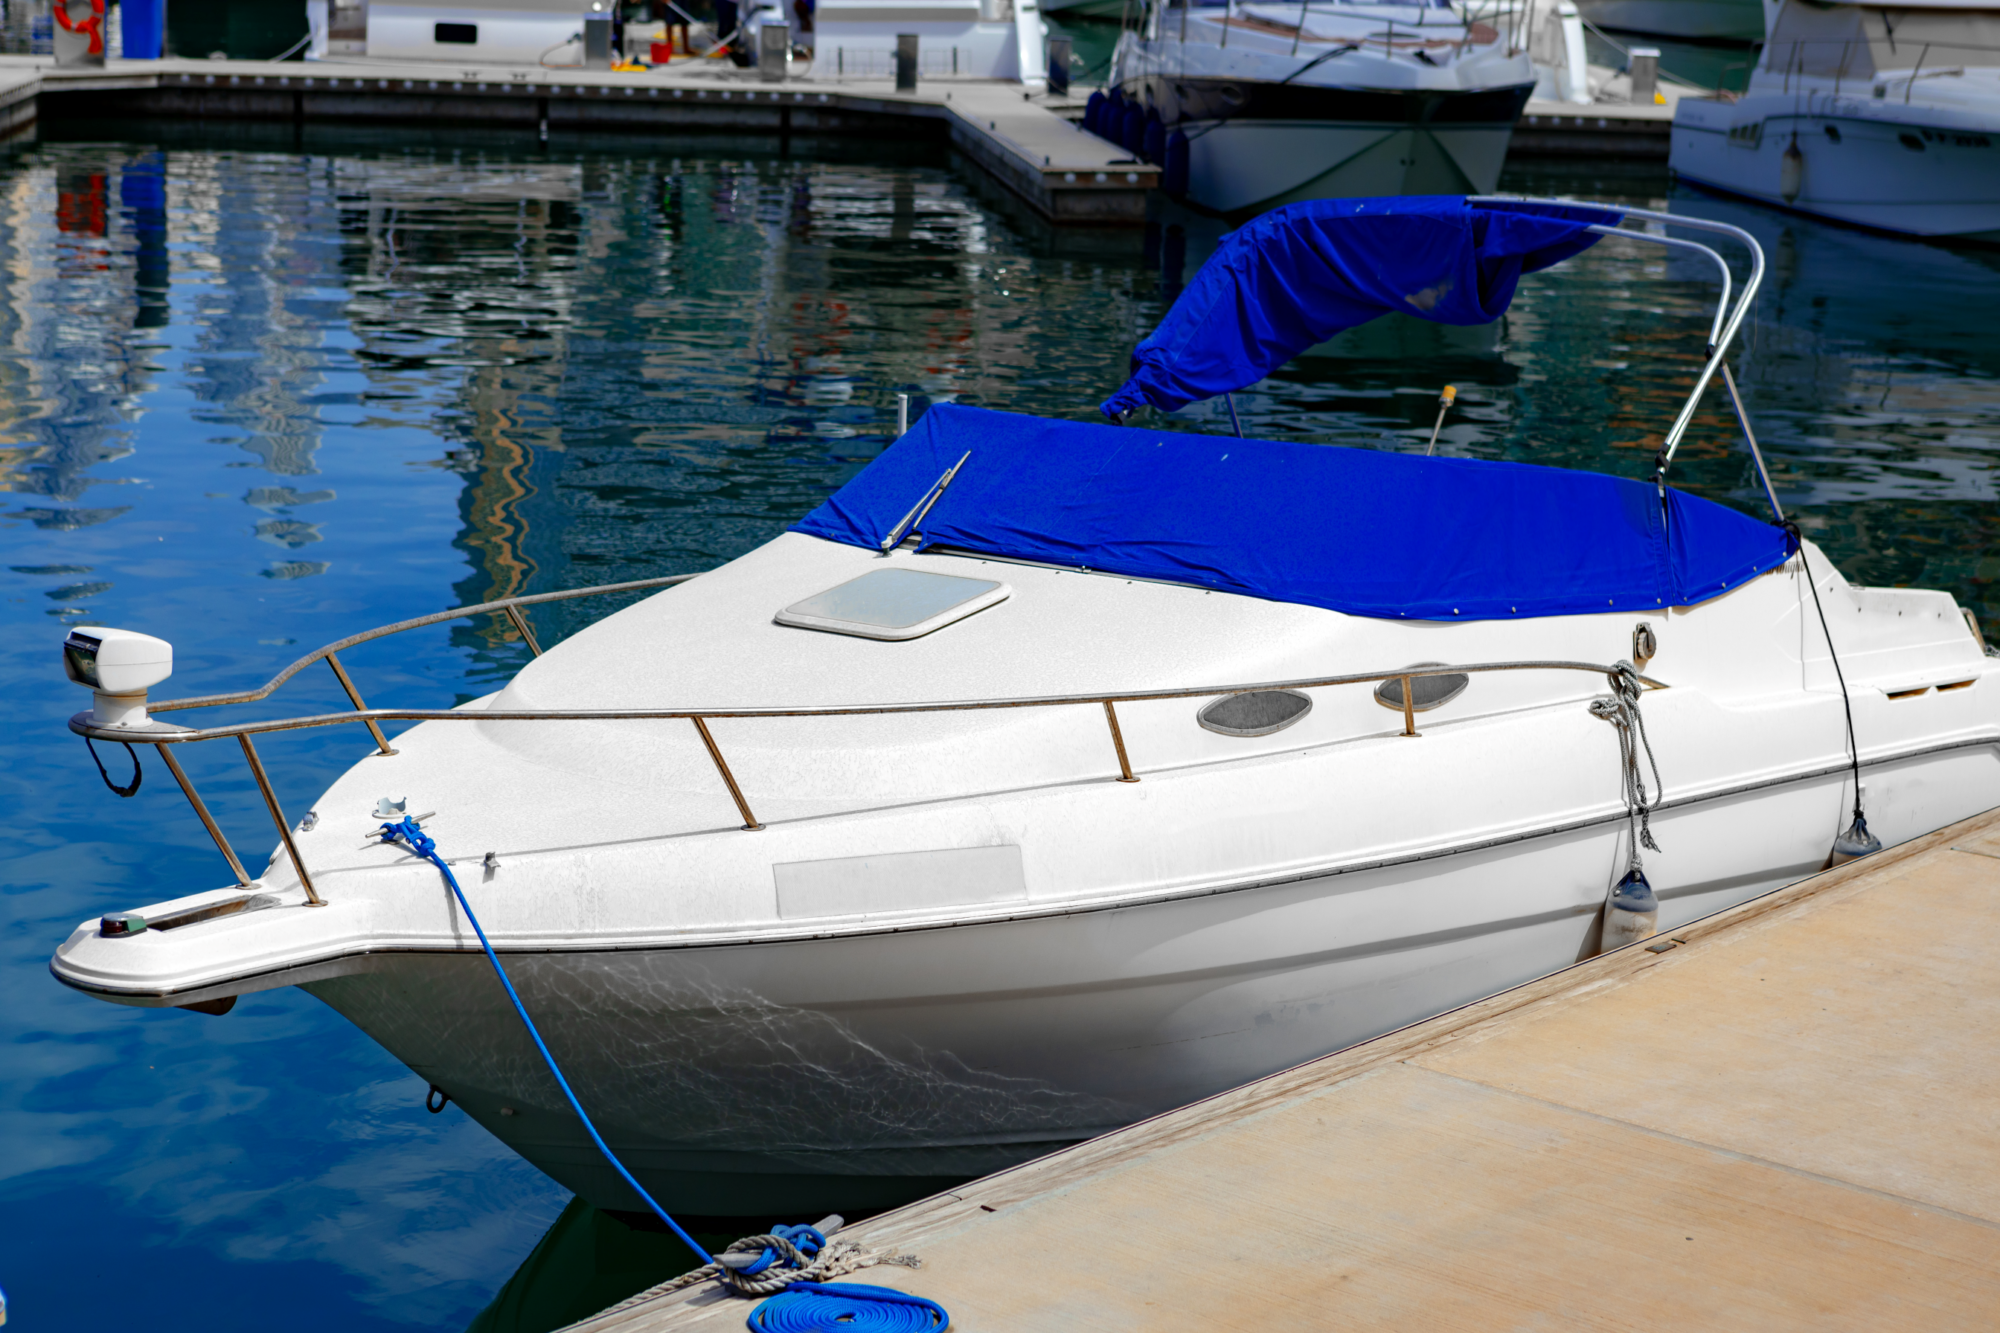 How to Repair and Replace Boat Glass - marine glass, marine glass repair, replace boat windows, windshields for boats, boat windshield replacement - Modern Glazing